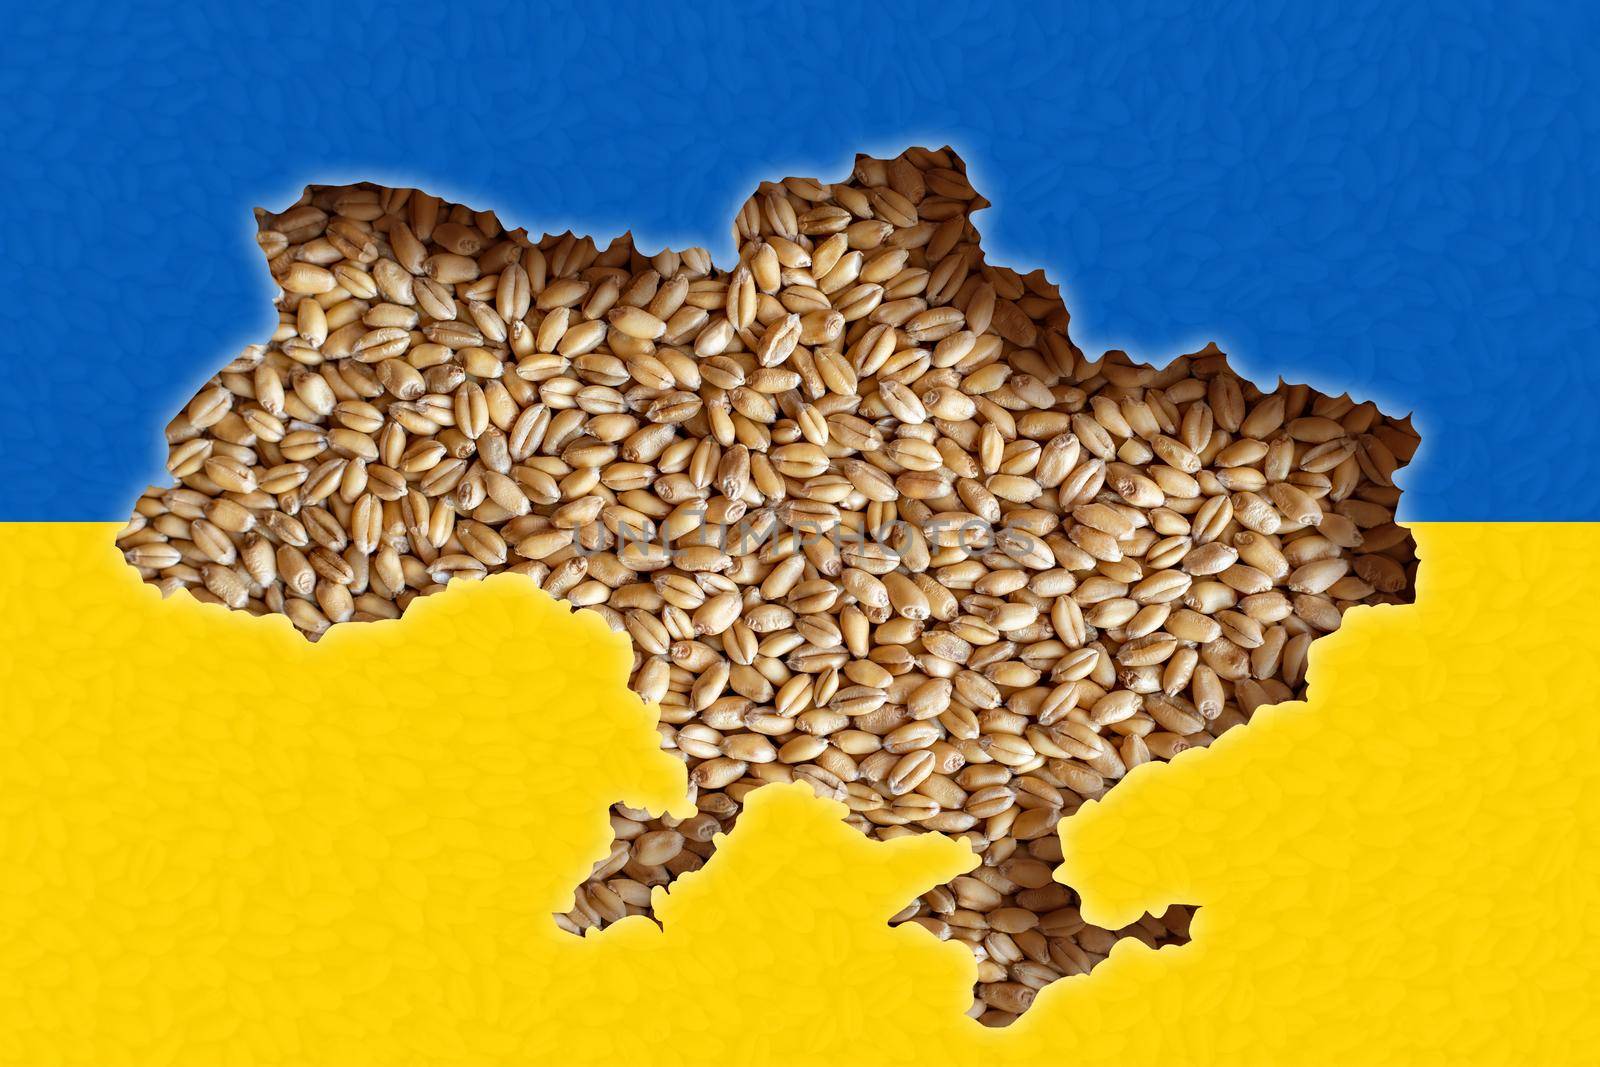 Ukrainian lies on wheat that is impossible to export. World grain crisis concept by adamr